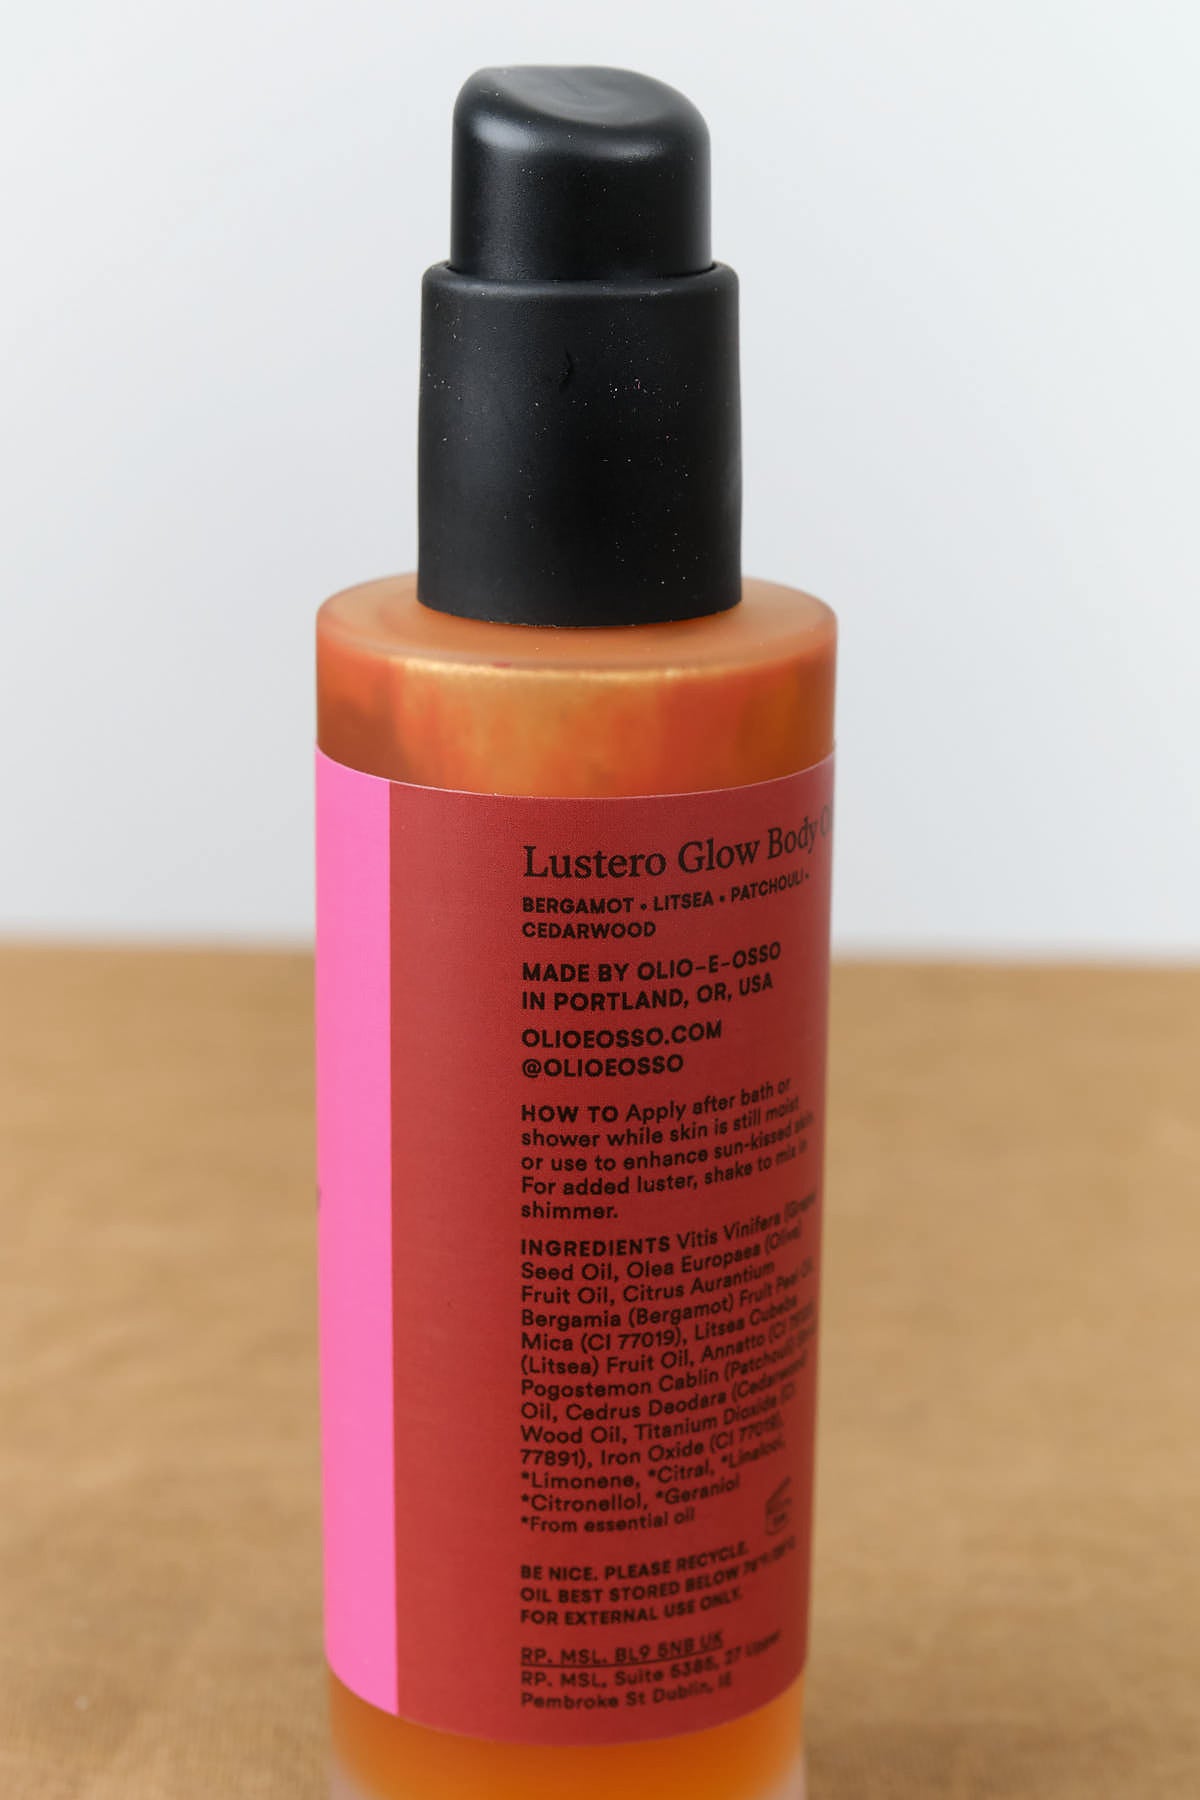 Back view of Lustero Glow Body Oil